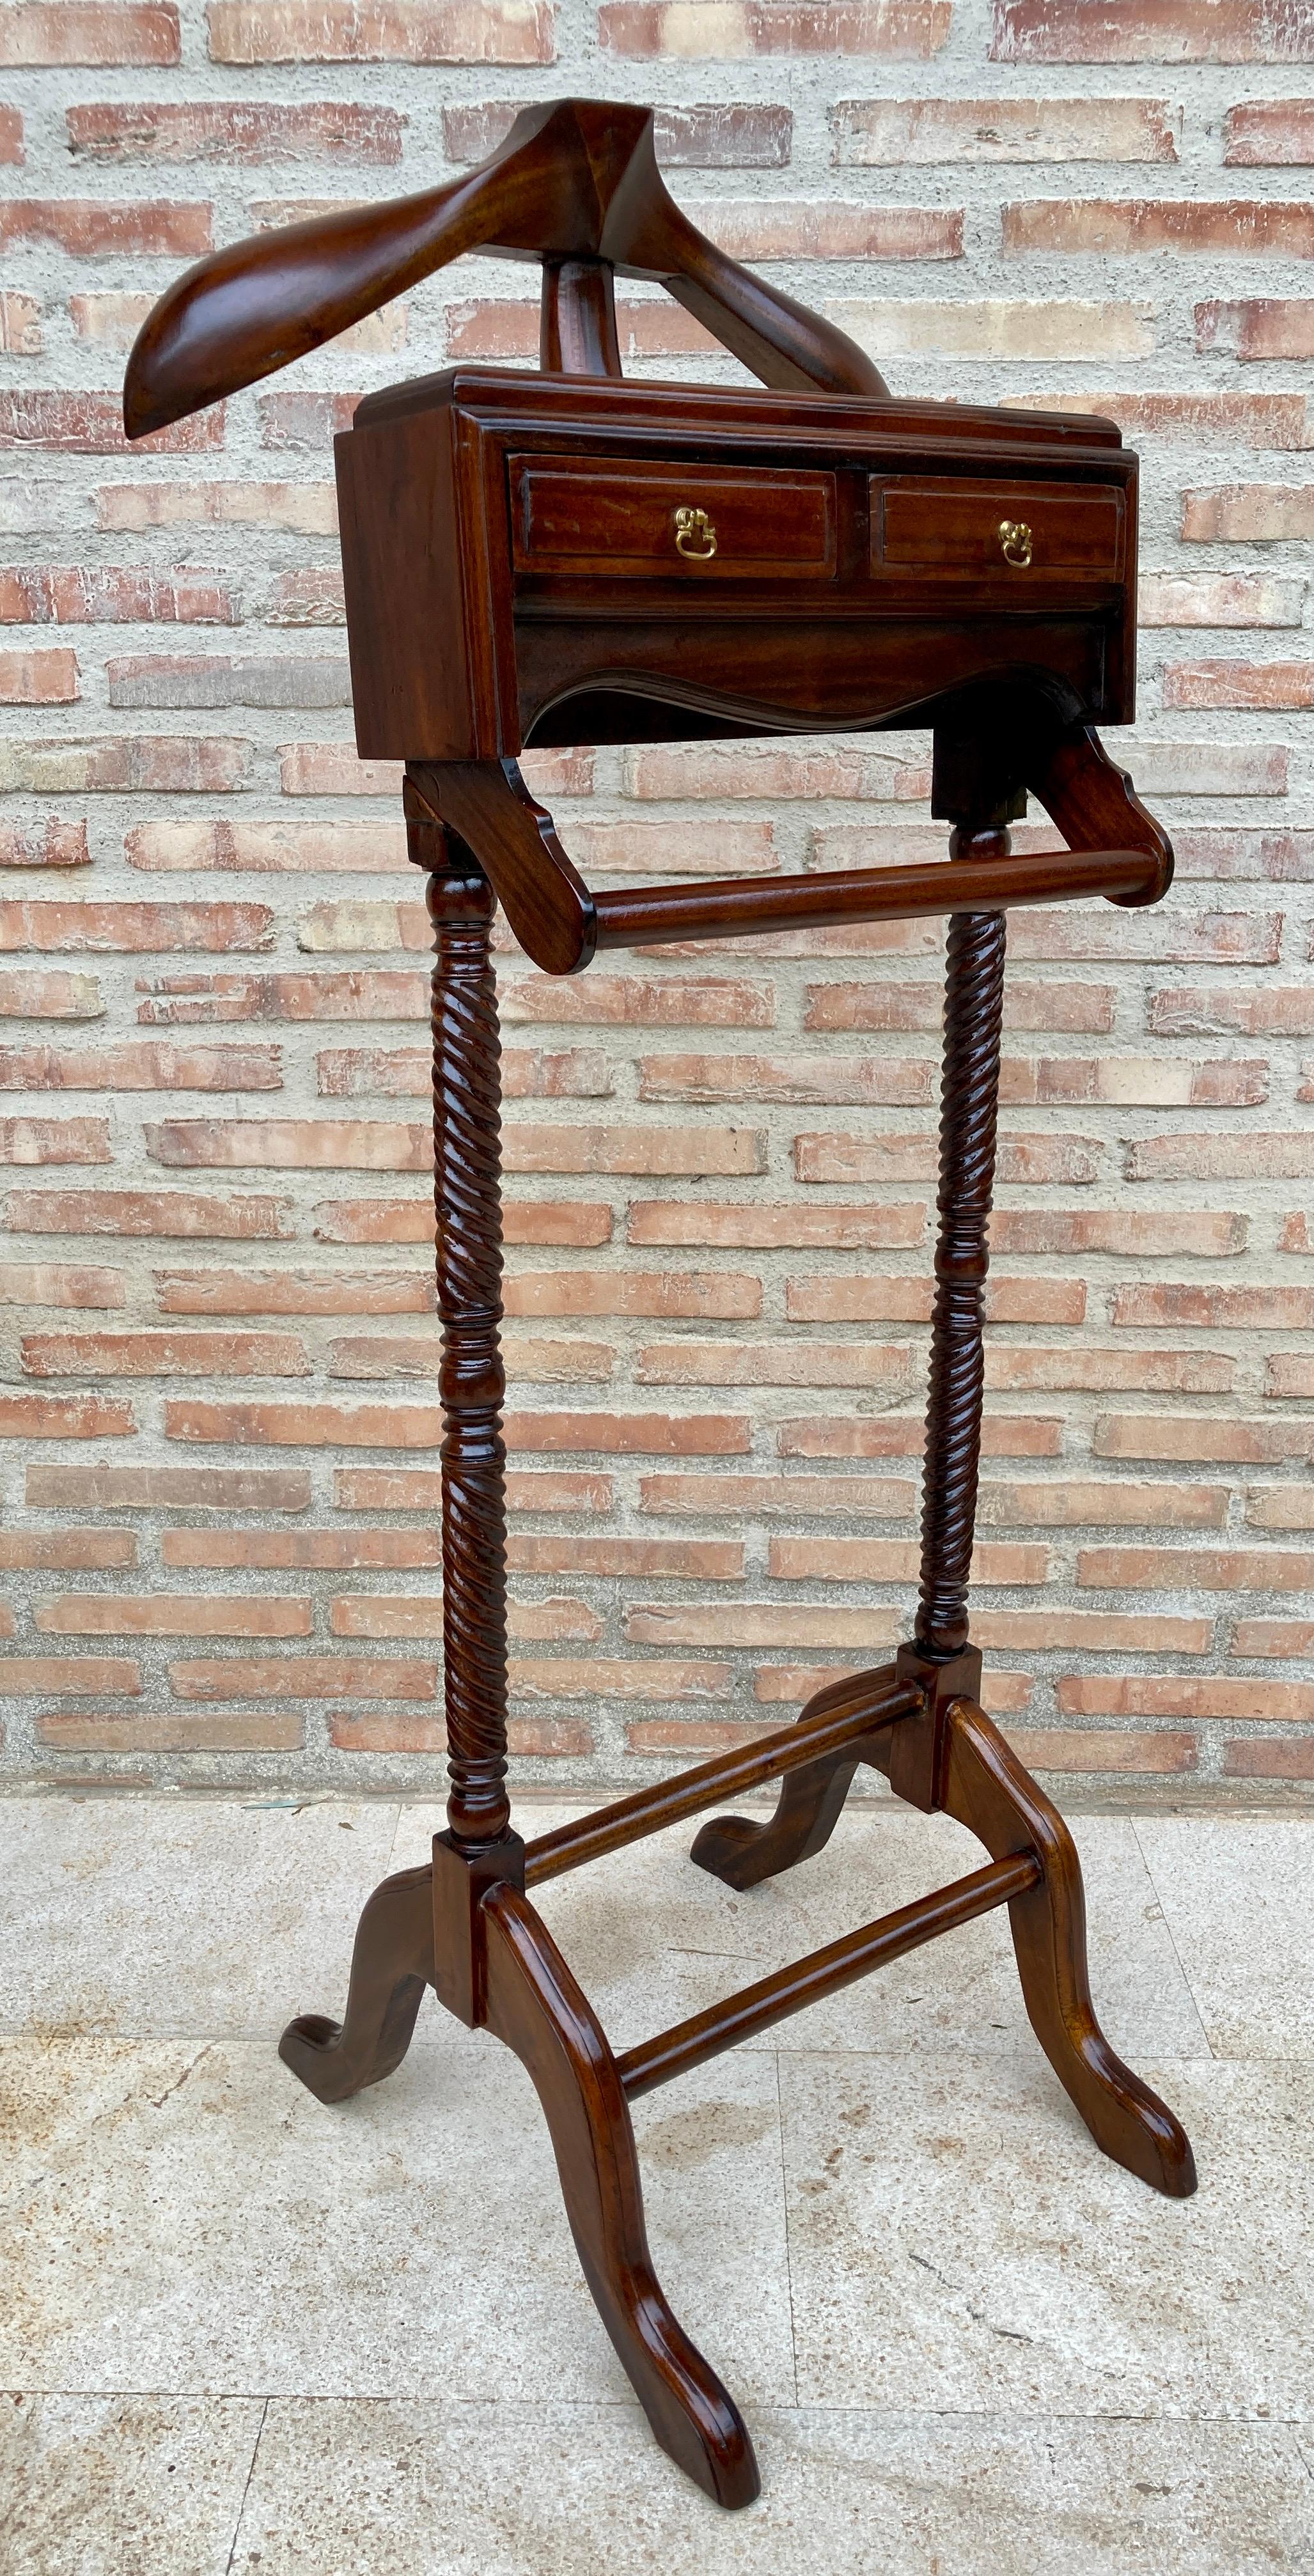 Vintage mid-century gentlemen's valet.

Dark walnut and features shelf for cuff links or jewelry and bars for hanging clothing.